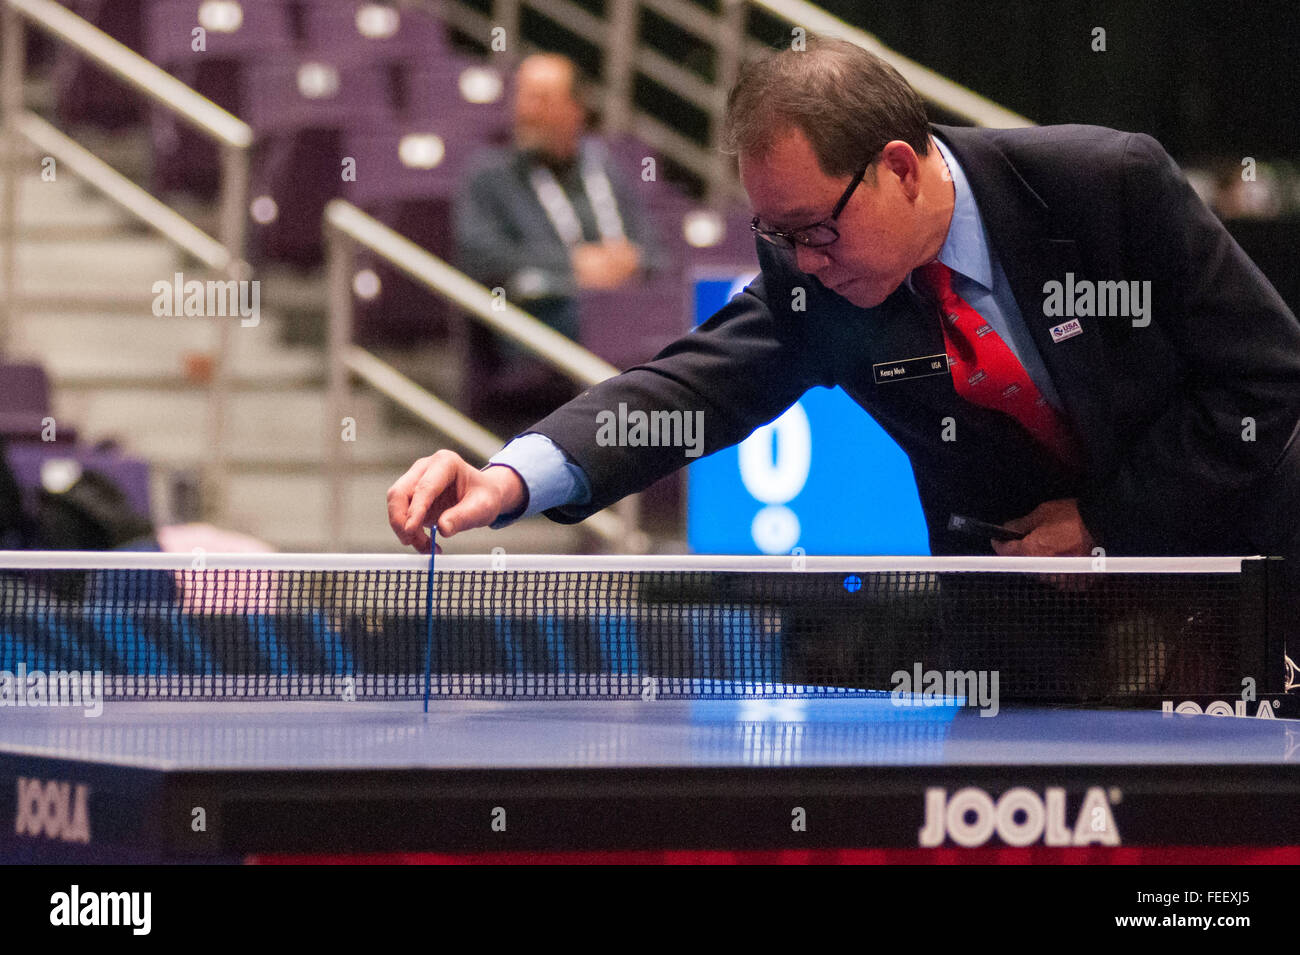 Greensboro, North Carolina, US. 5th Feb, 2016. Feb. 5, 2016 - Greensboro, N.C., USA - Umpire KENNY MOCK inspects the net before the women's final on day two of the 2016 U.S. Olympic Table Tennis Trials. The top three men and women from the trials move on to compete in April at the 2016 North America Olympic Qualification tournament in Ontario, Canada. The 2016 Summer Olympics will be held in Rio De Janeiro, Brazil, Aug. 5-21. © Timothy L. Hale/ZUMA Wire/Alamy Live News Stock Photo